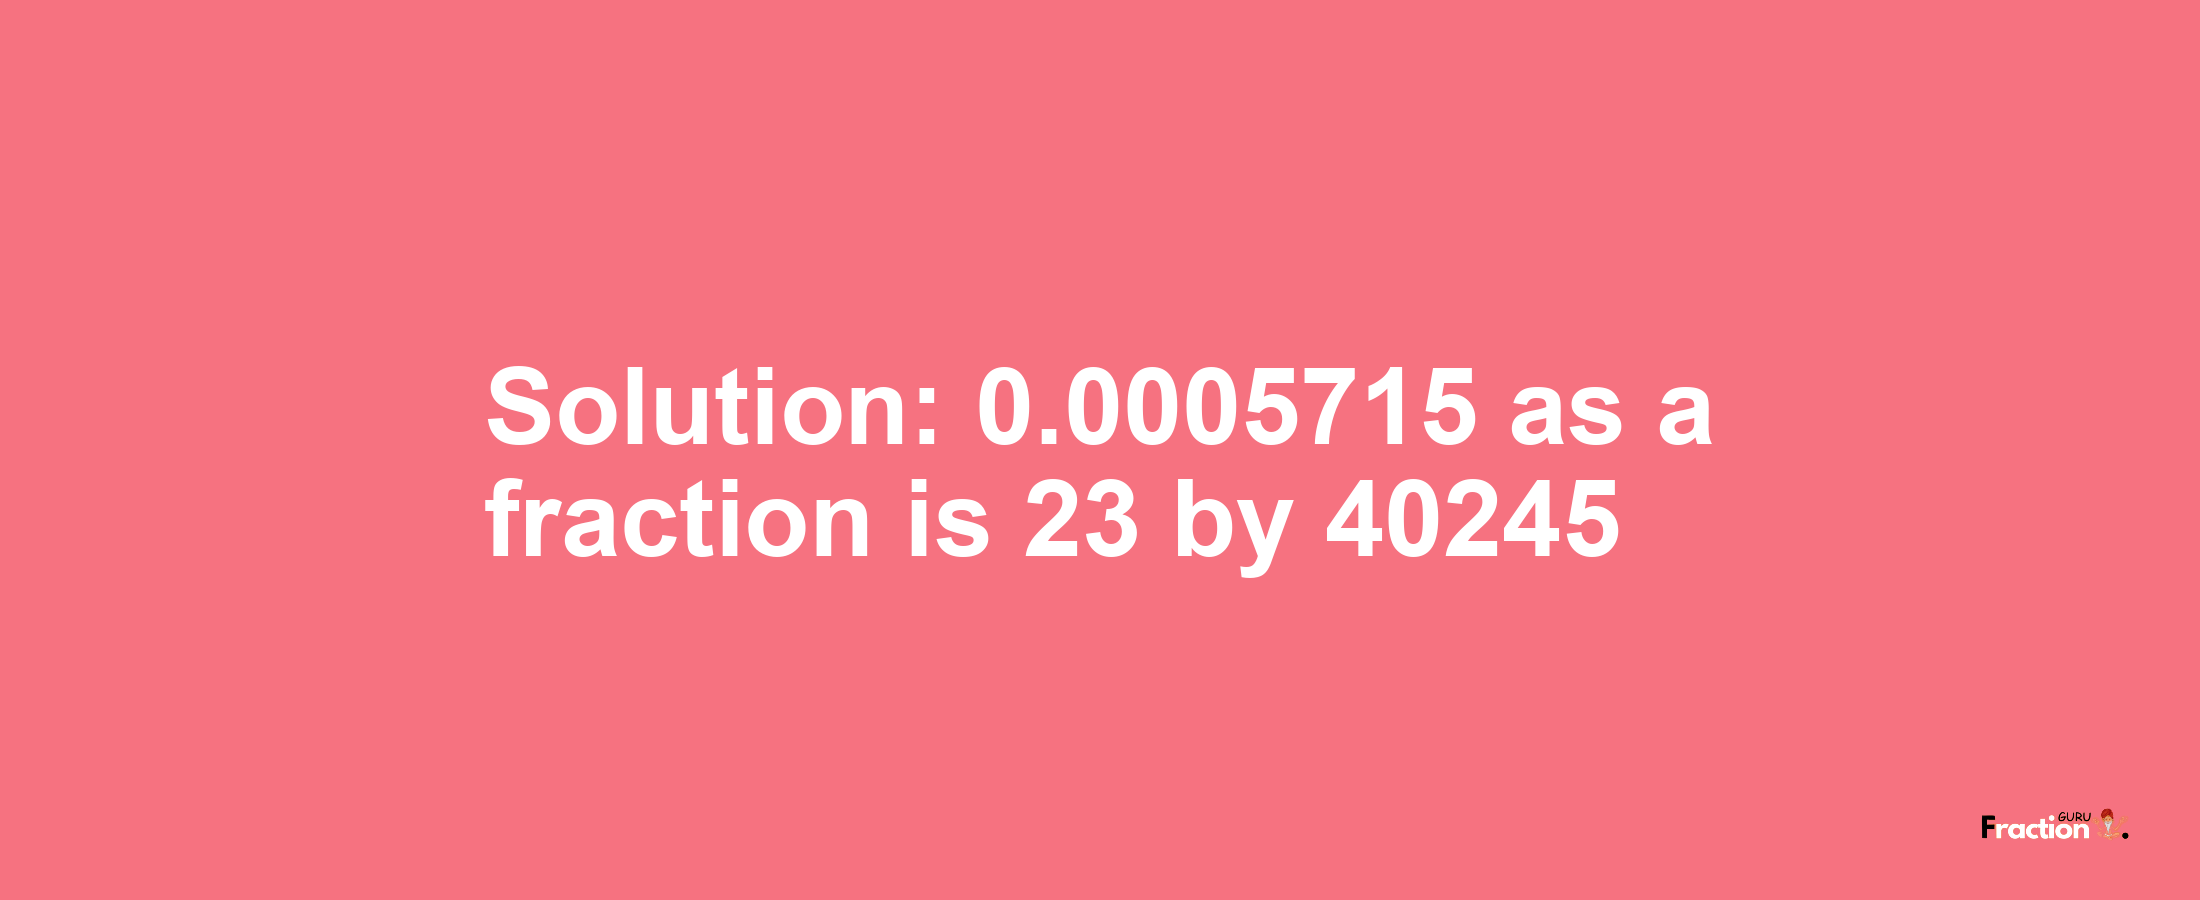 Solution:0.0005715 as a fraction is 23/40245